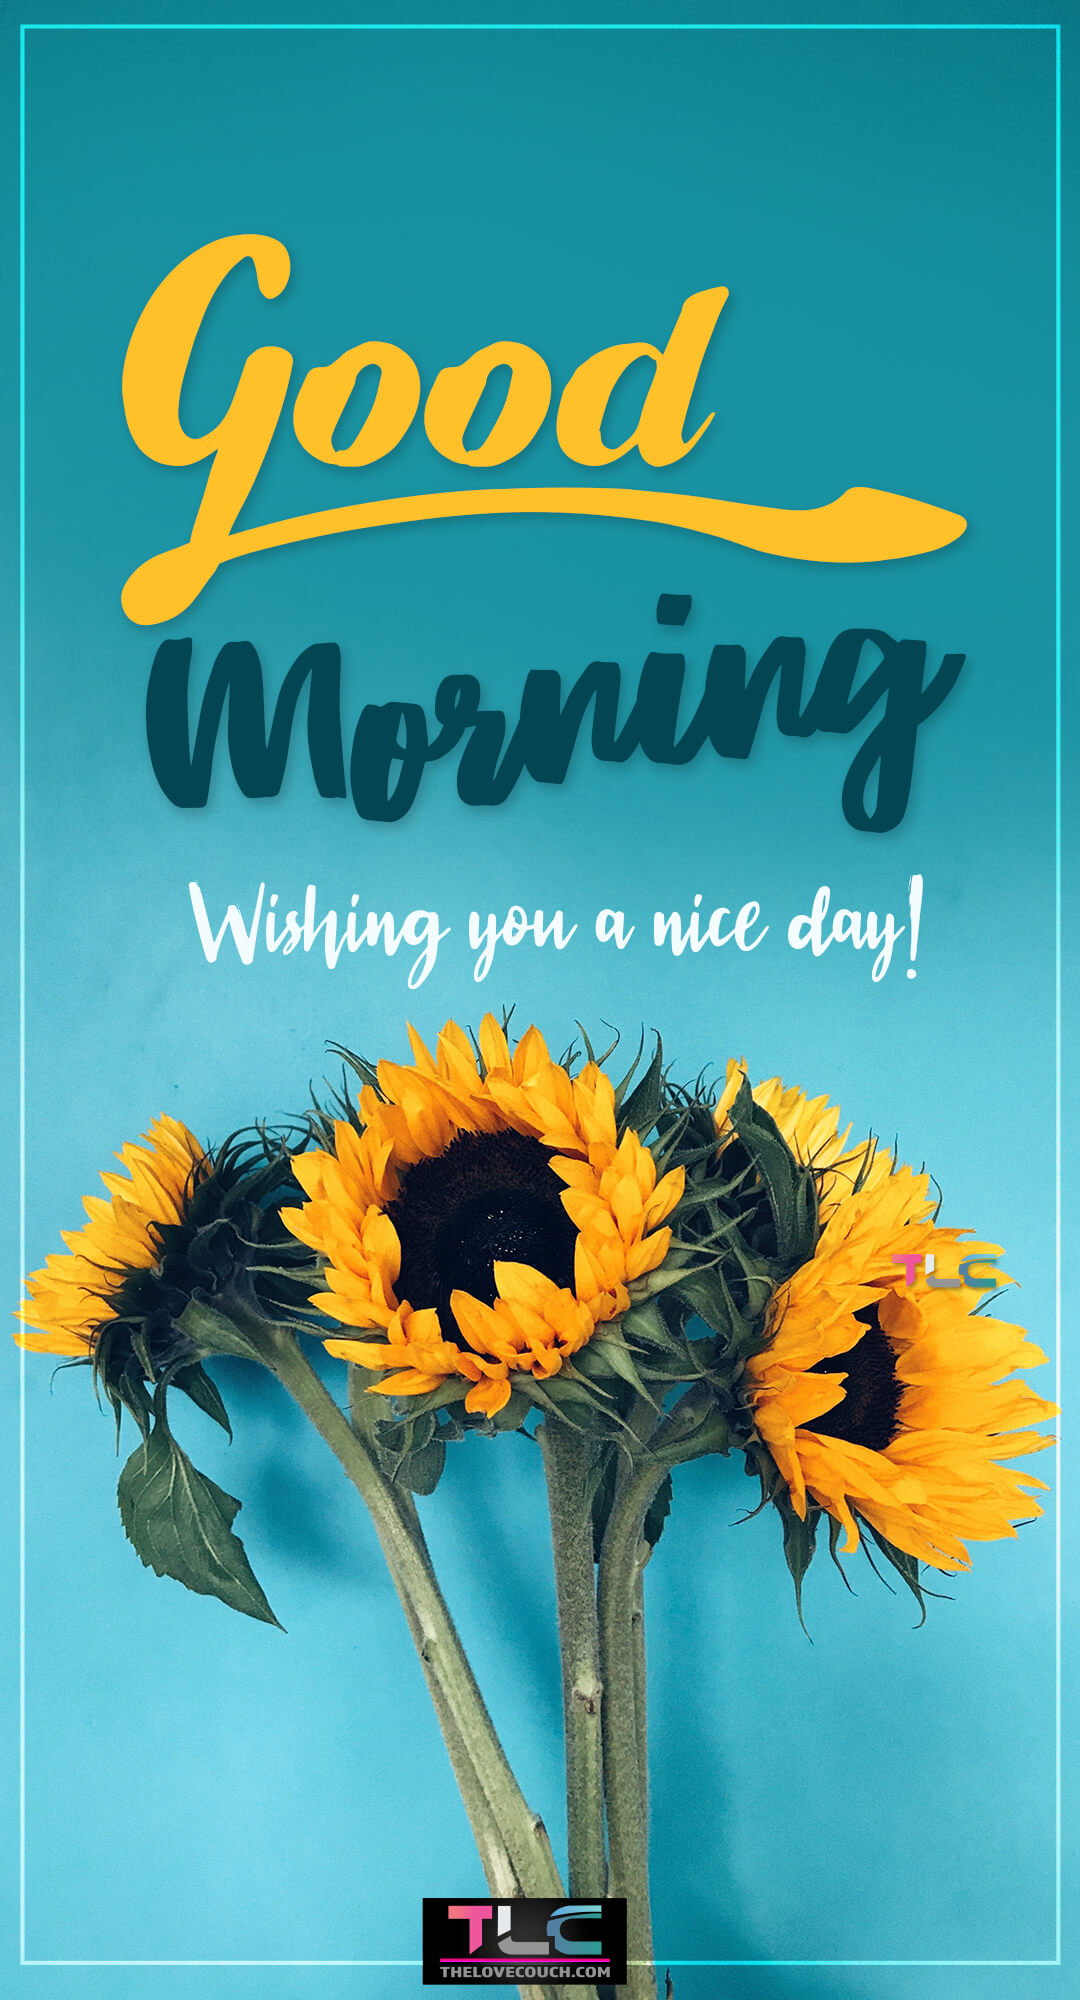 Good Morning Pictures - Sunflowers in bloom on a teal background - Wishing you a nice day